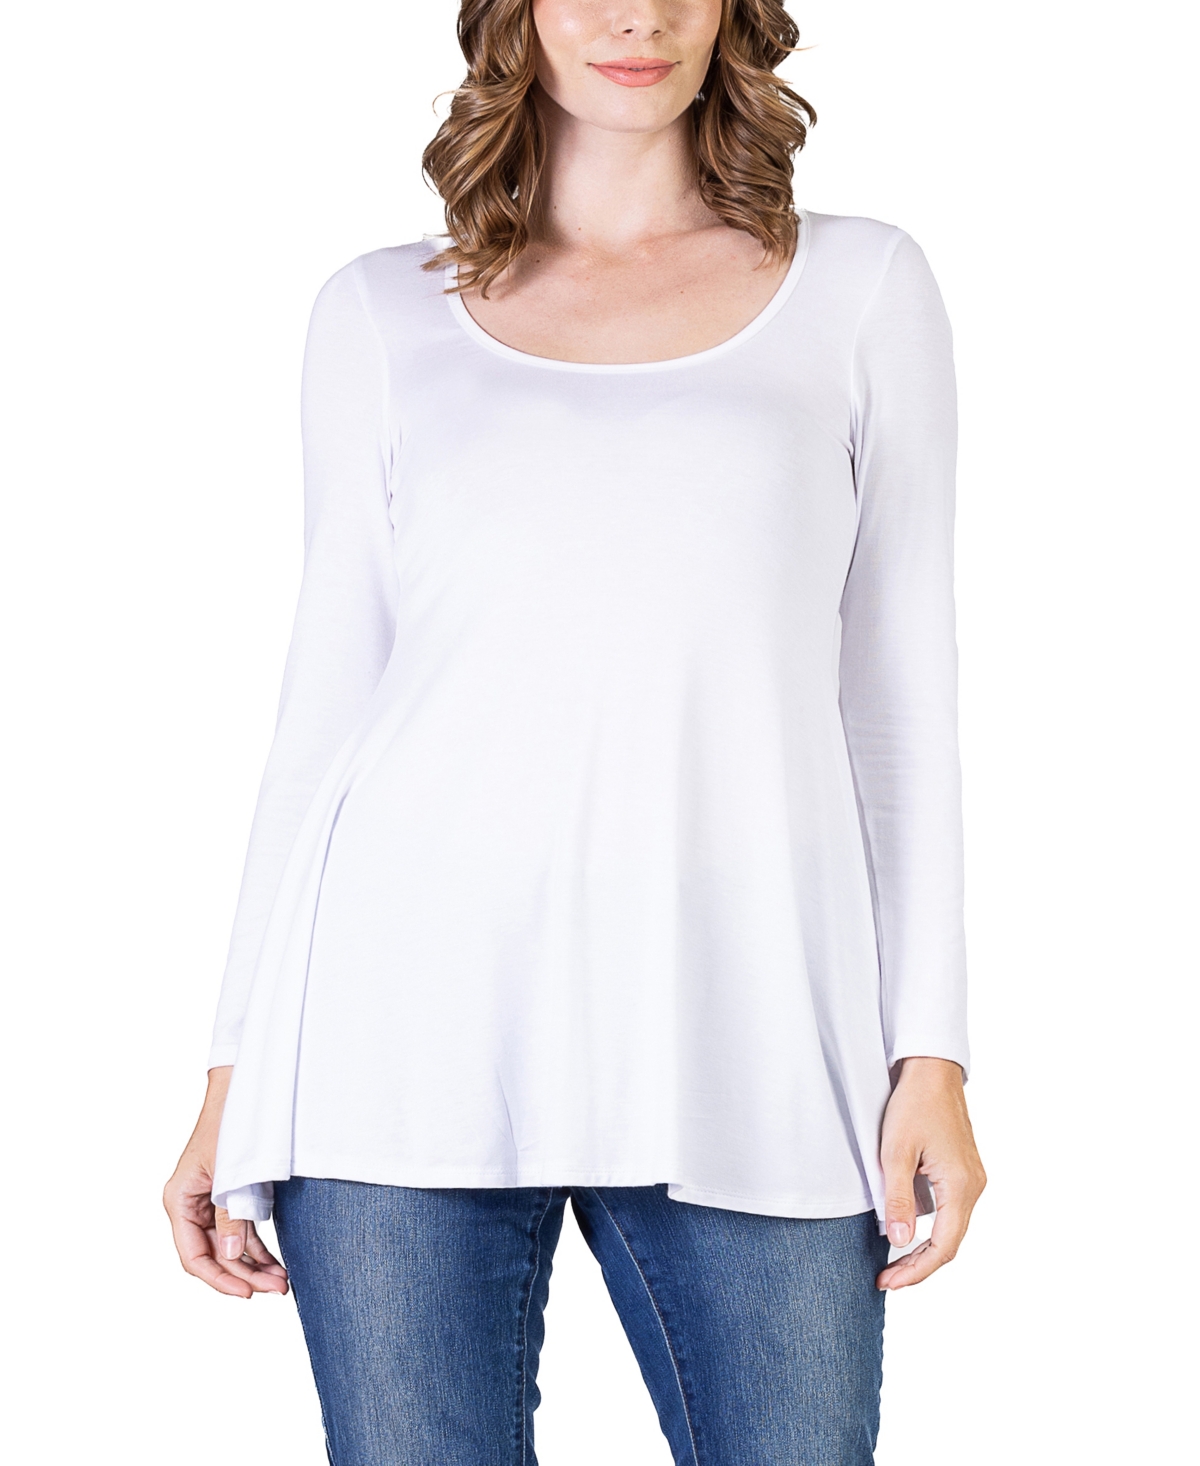 24seven Comfort Apparel Women's Long Sleeve Swing Style Flare Tunic Top In White